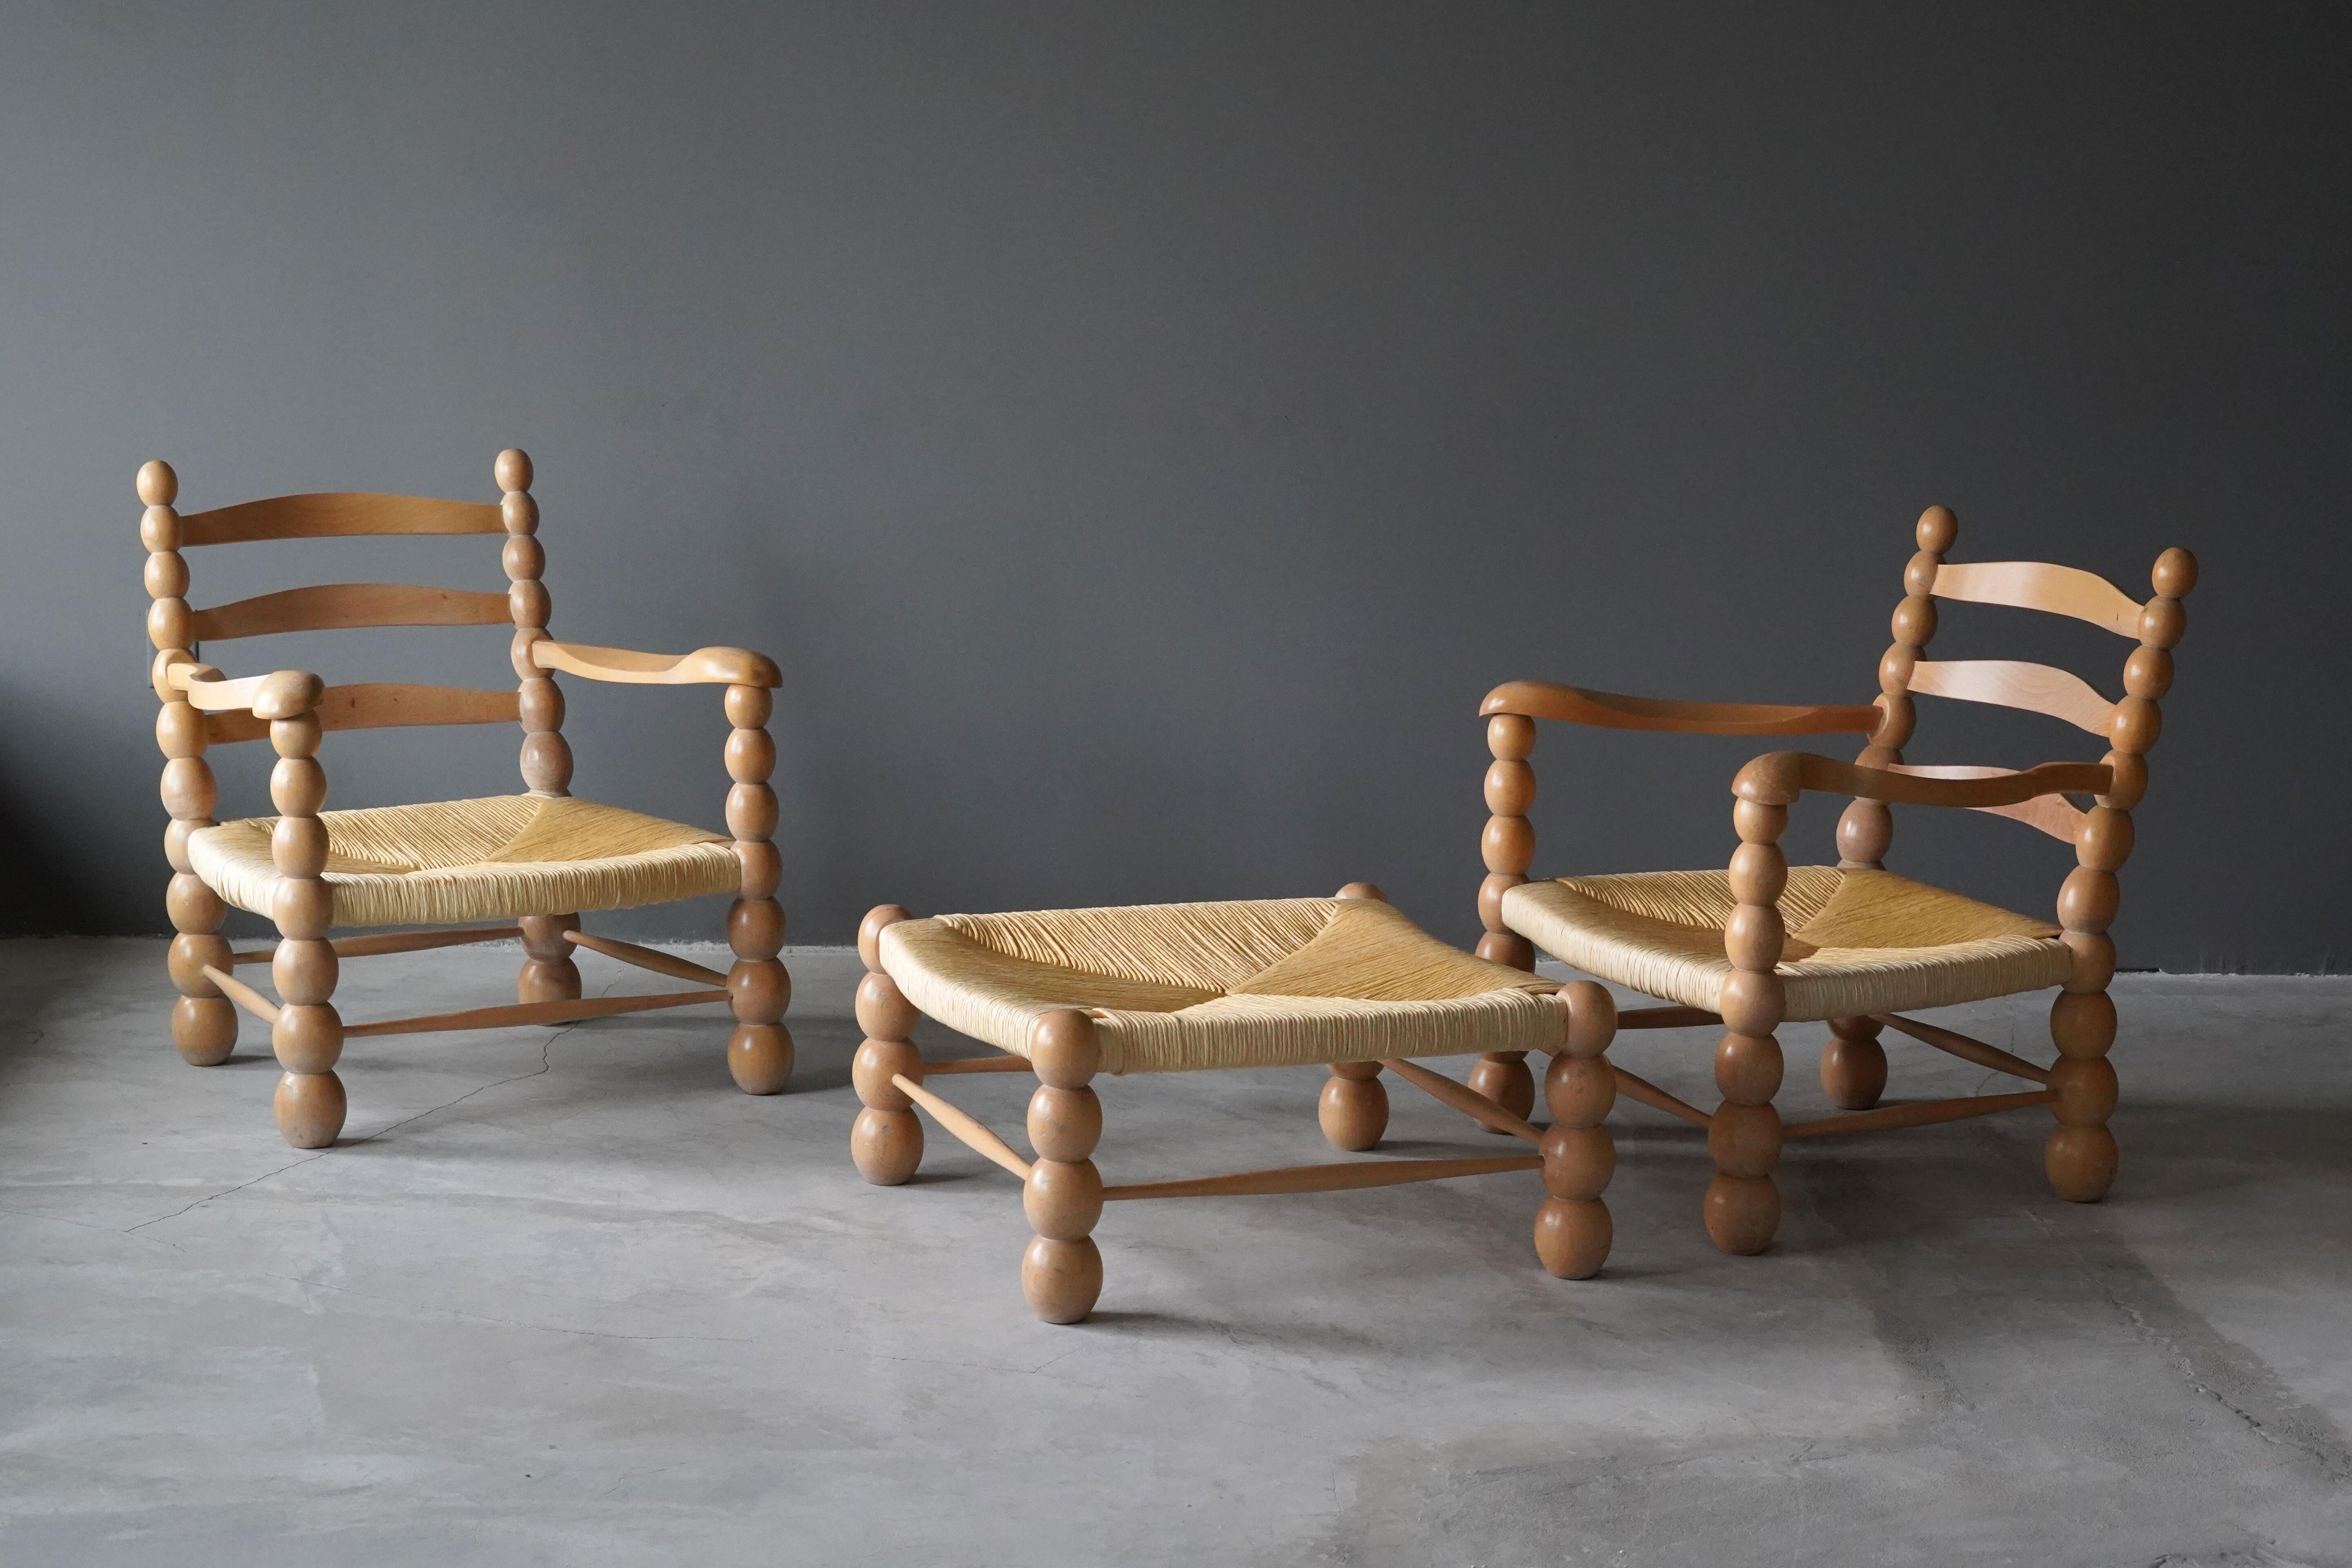 A pair of lounge chairs / armchairs. Executed in finely carved European beech and rattan. Produced in Italy 1960s. Expresses a visual language similar to that of works by Paolo Buffa or Jean Royere.